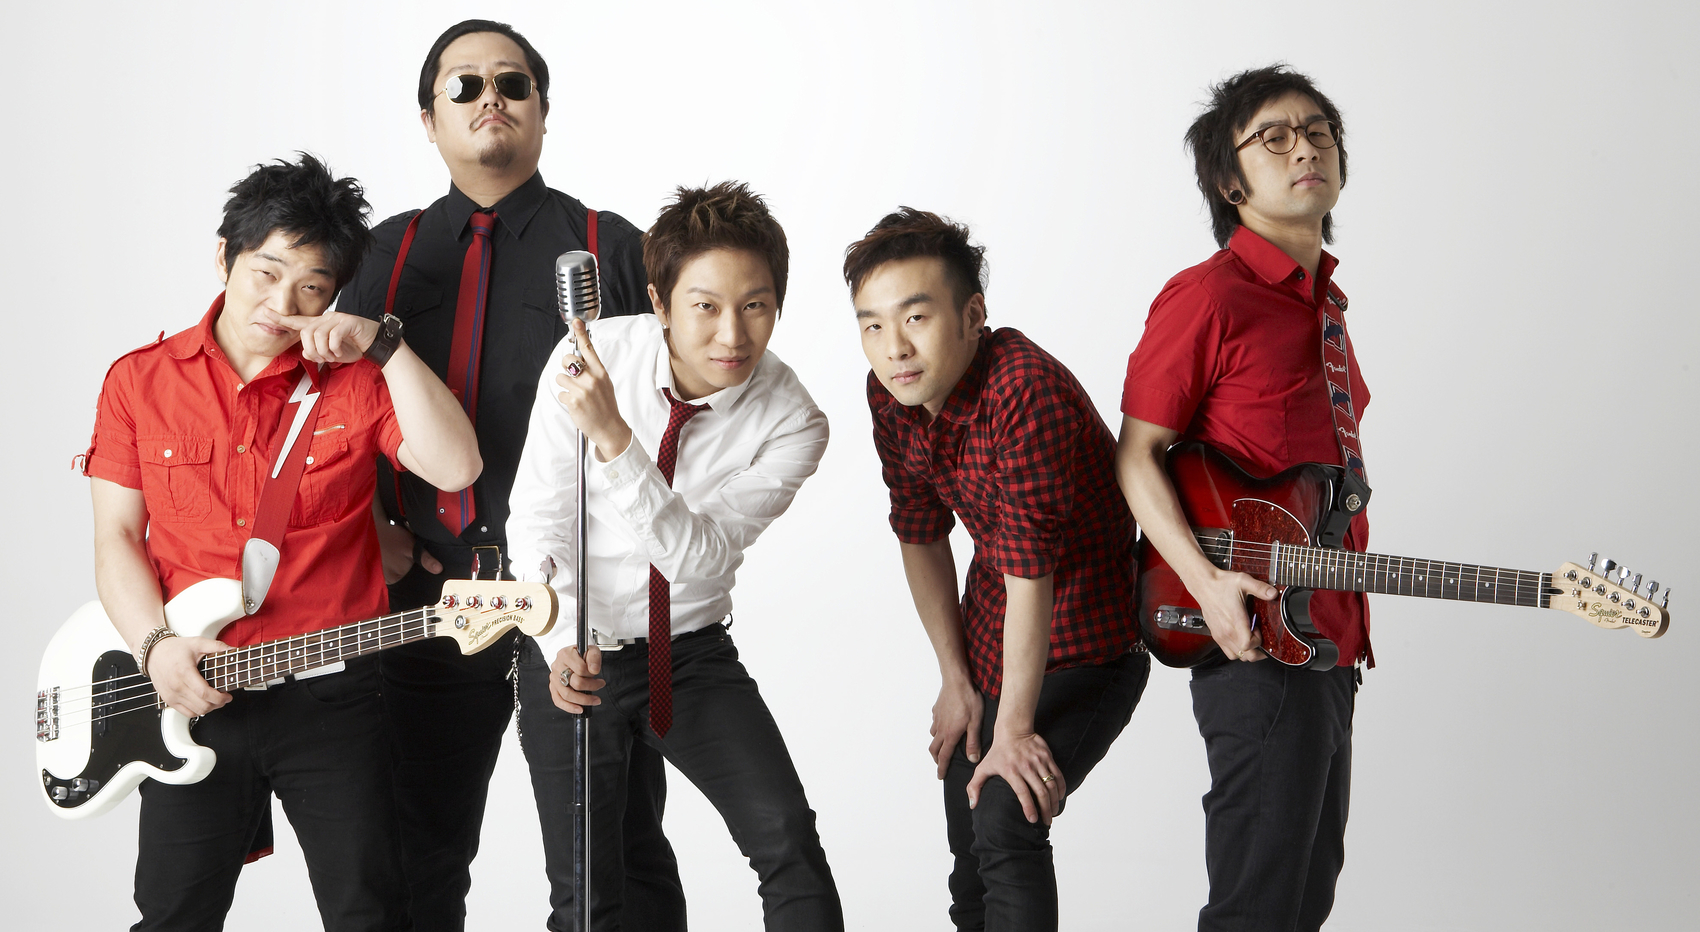 [EXCLUSIVE INTERVIEW] Korea's Indie Punk Band - Crying Nut - HYPNOTICASIA